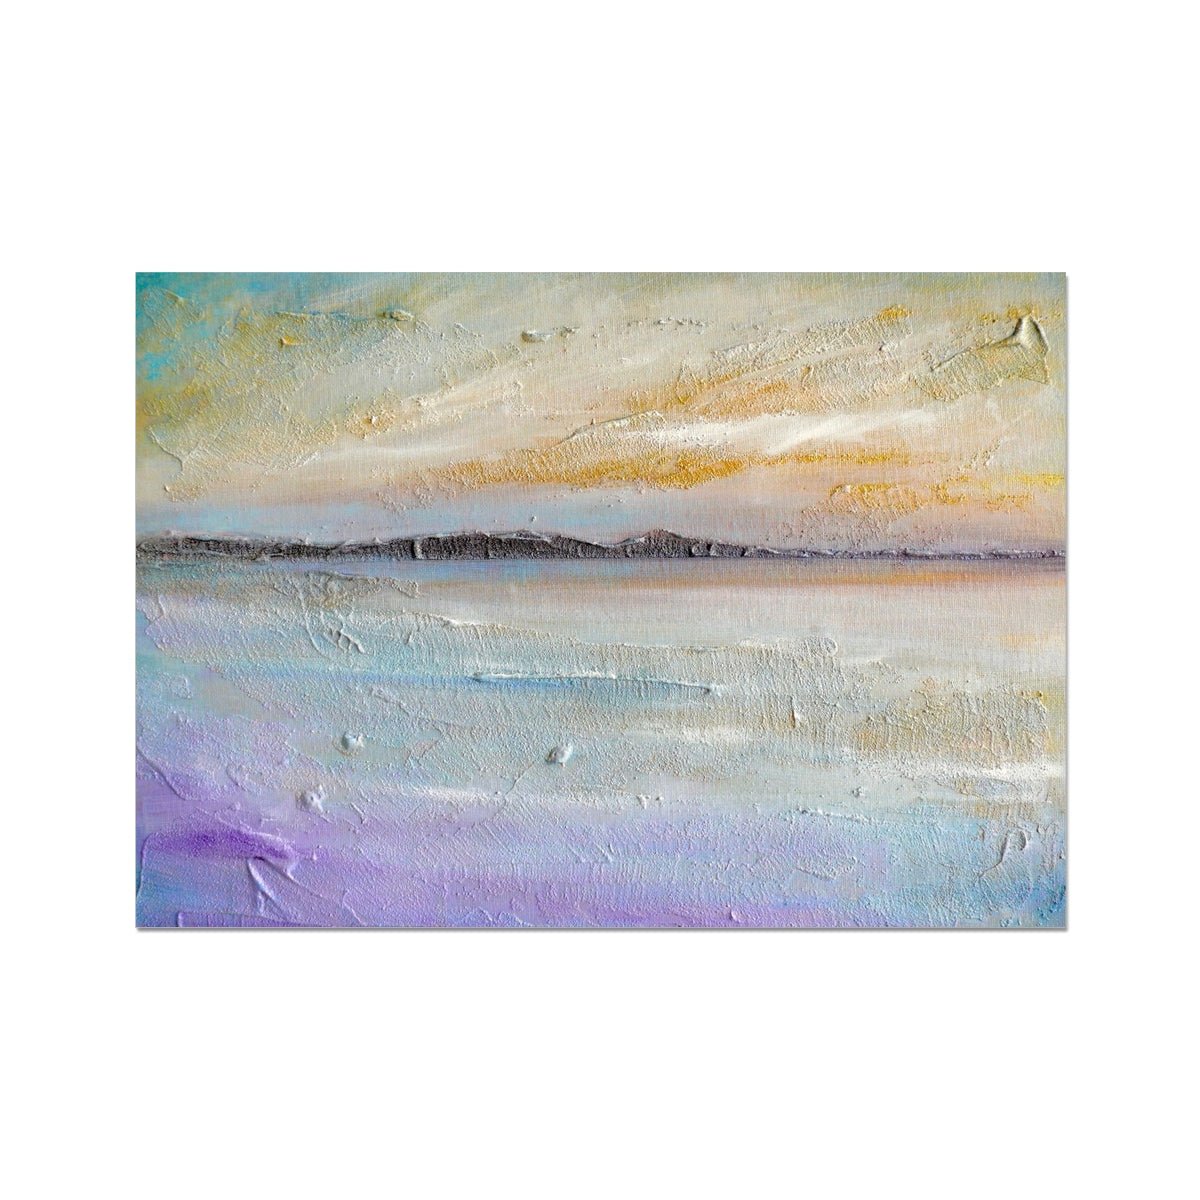 Sollas Beach North Uist Painting | Fine Art Prints From Scotland-Unframed Prints-Hebridean Islands Art Gallery-A2 Landscape-Paintings, Prints, Homeware, Art Gifts From Scotland By Scottish Artist Kevin Hunter